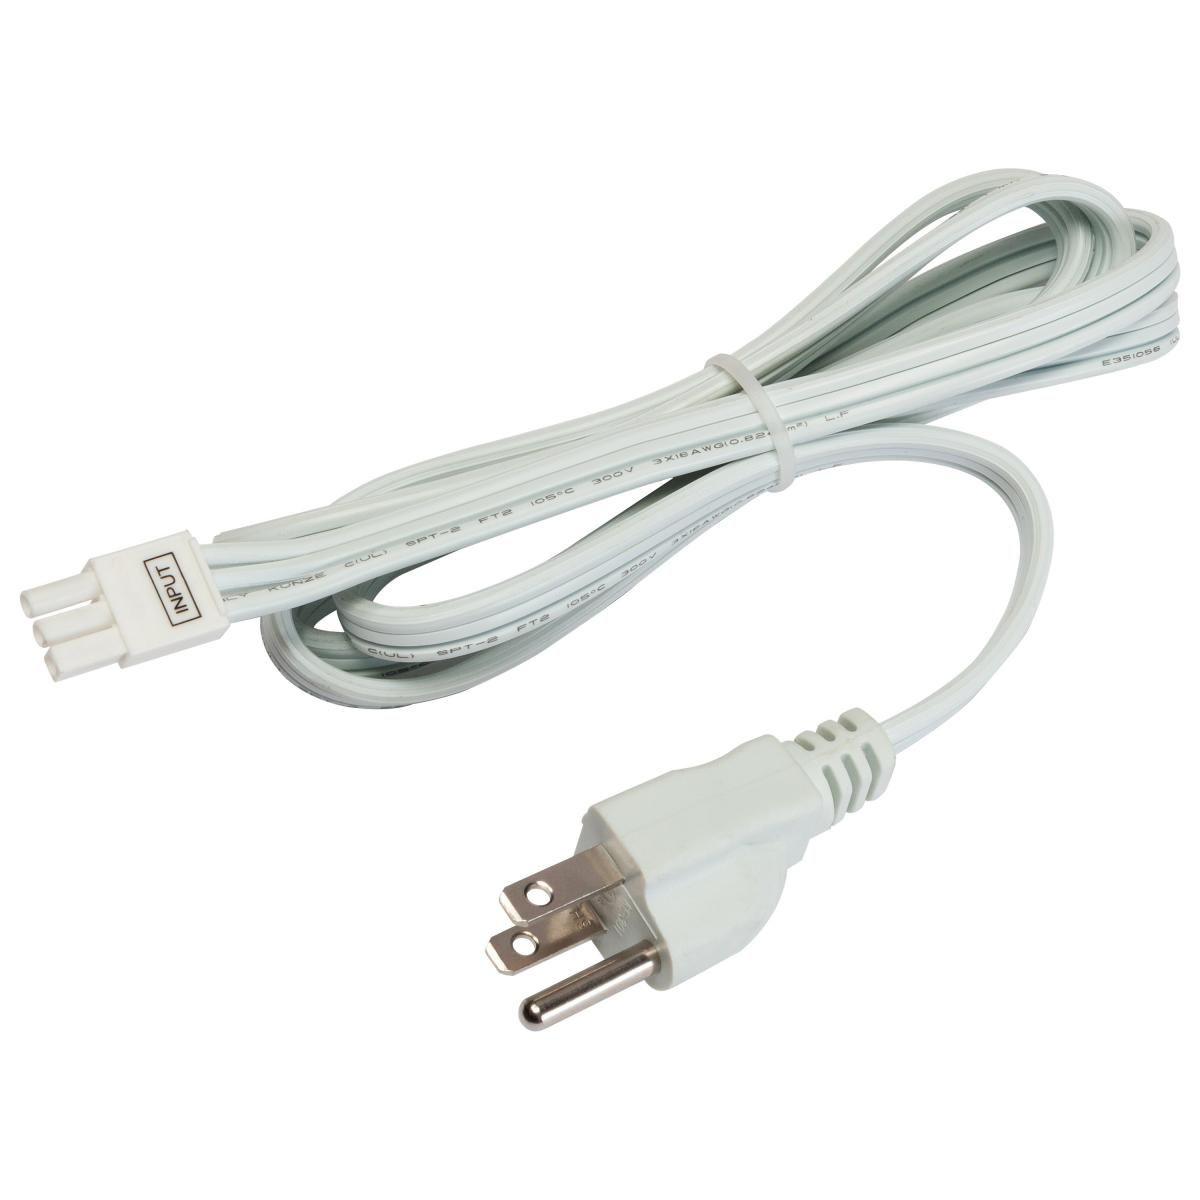 CounterQUICK 60in. Power Cord